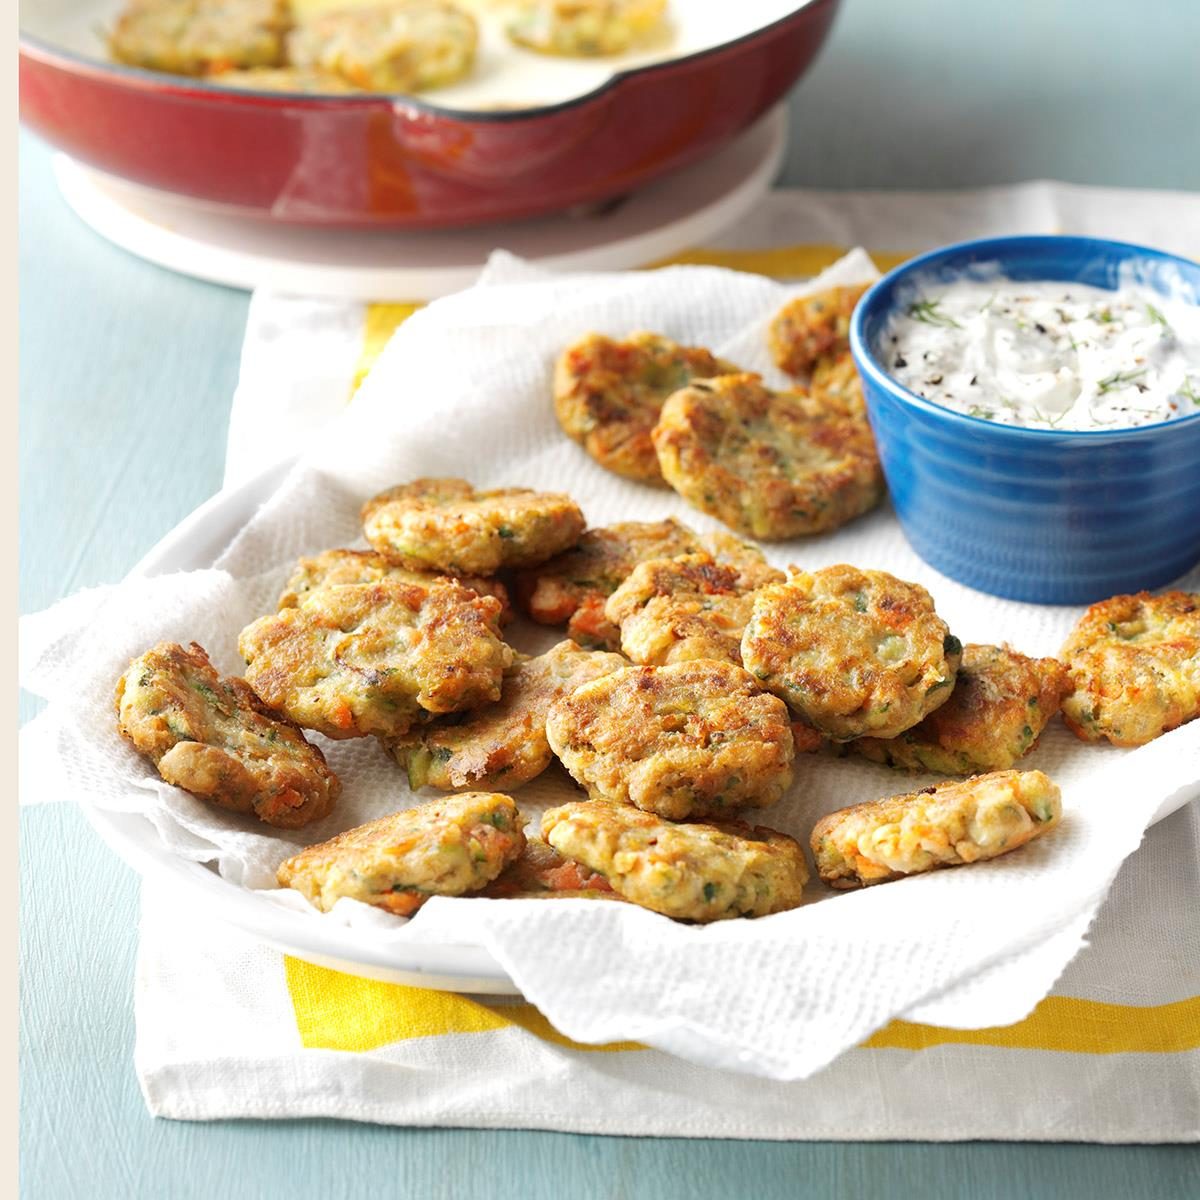 <p>These crisp-tender patties are a nice alternative to crab cakes and taste very similar, thanks to the seafood seasoning. They always get gobbled up! —Kelly Maxwell, Plainfield, Illinois</p> <div class="listicle-page__buttons"> <div class="listicle-page__cta-button"><a href='https://www.tasteofhome.com/recipes/zucchini-patties-with-dill-dip/'>Get Recipe</a></div> </div>